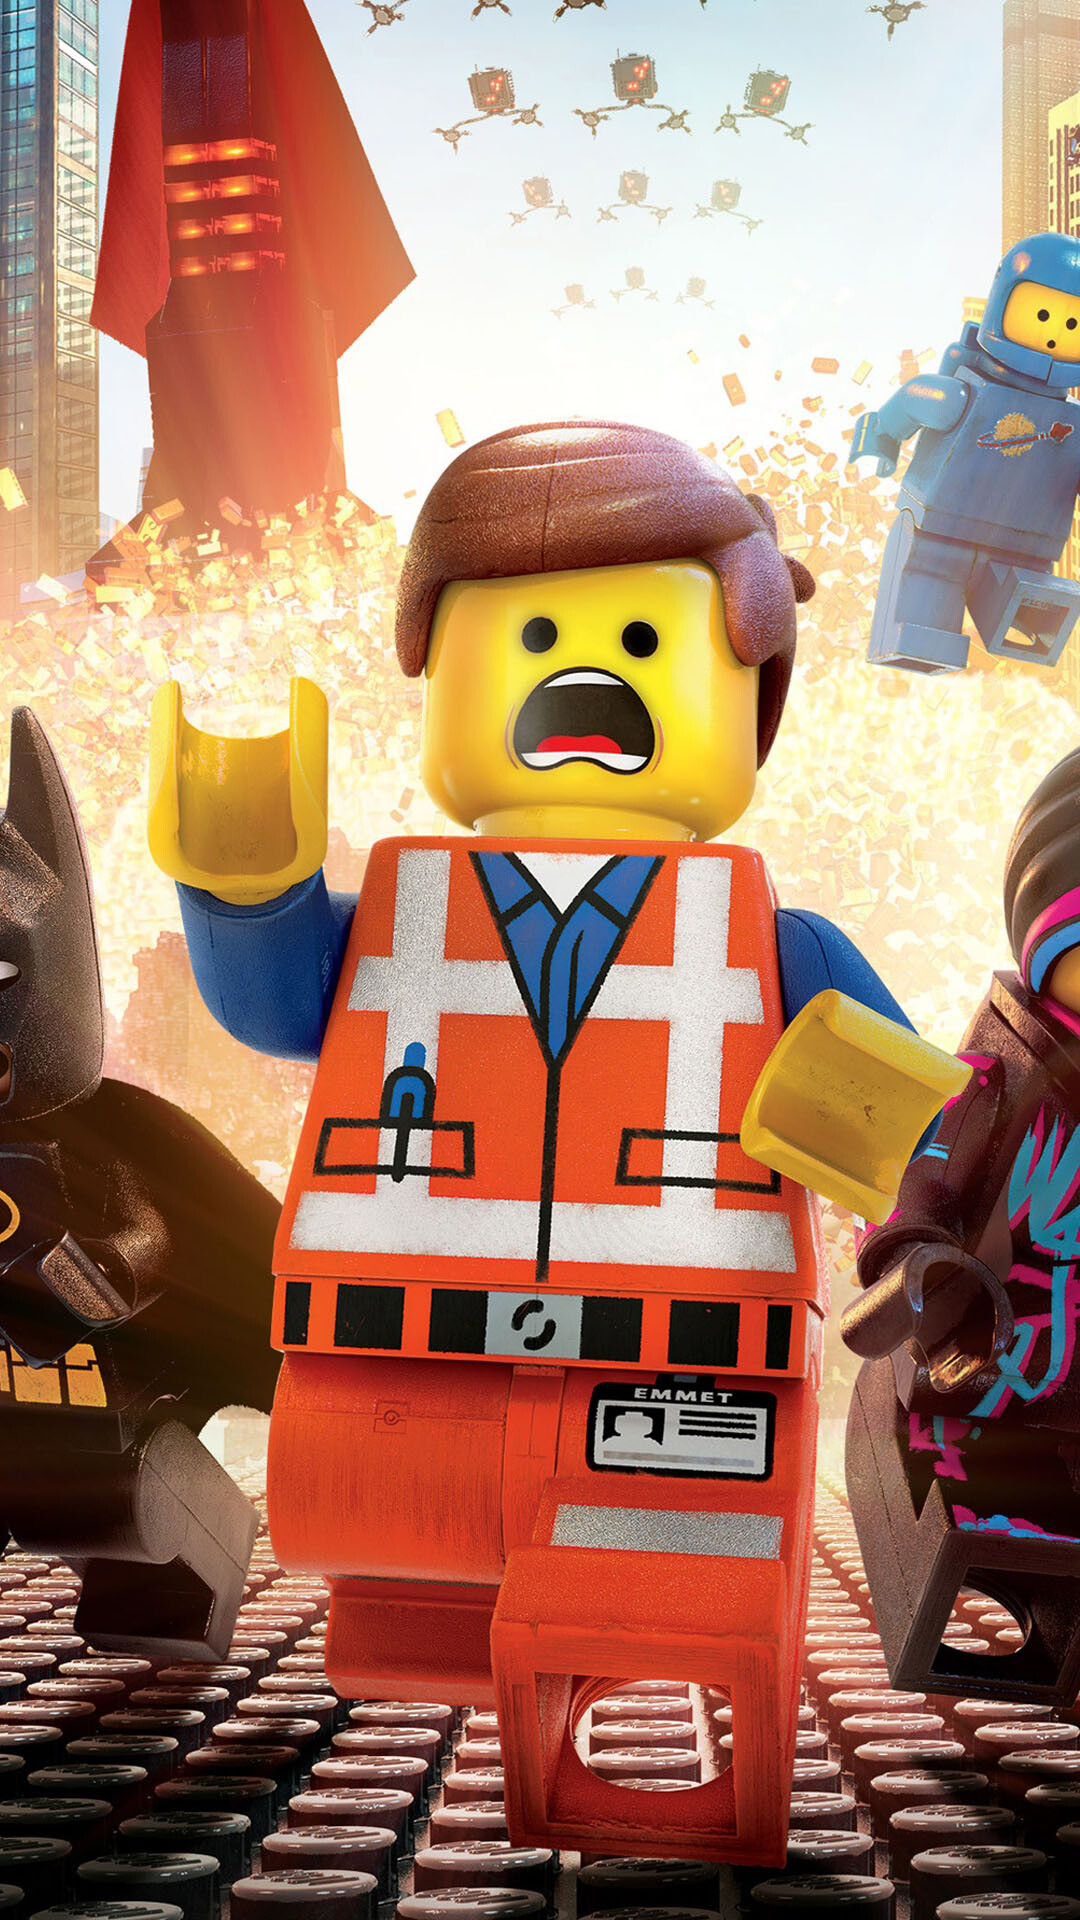 The Lego Movie: Emmet Brickowski, A Master Builder and construction worker. 1080x1920 Full HD Wallpaper.